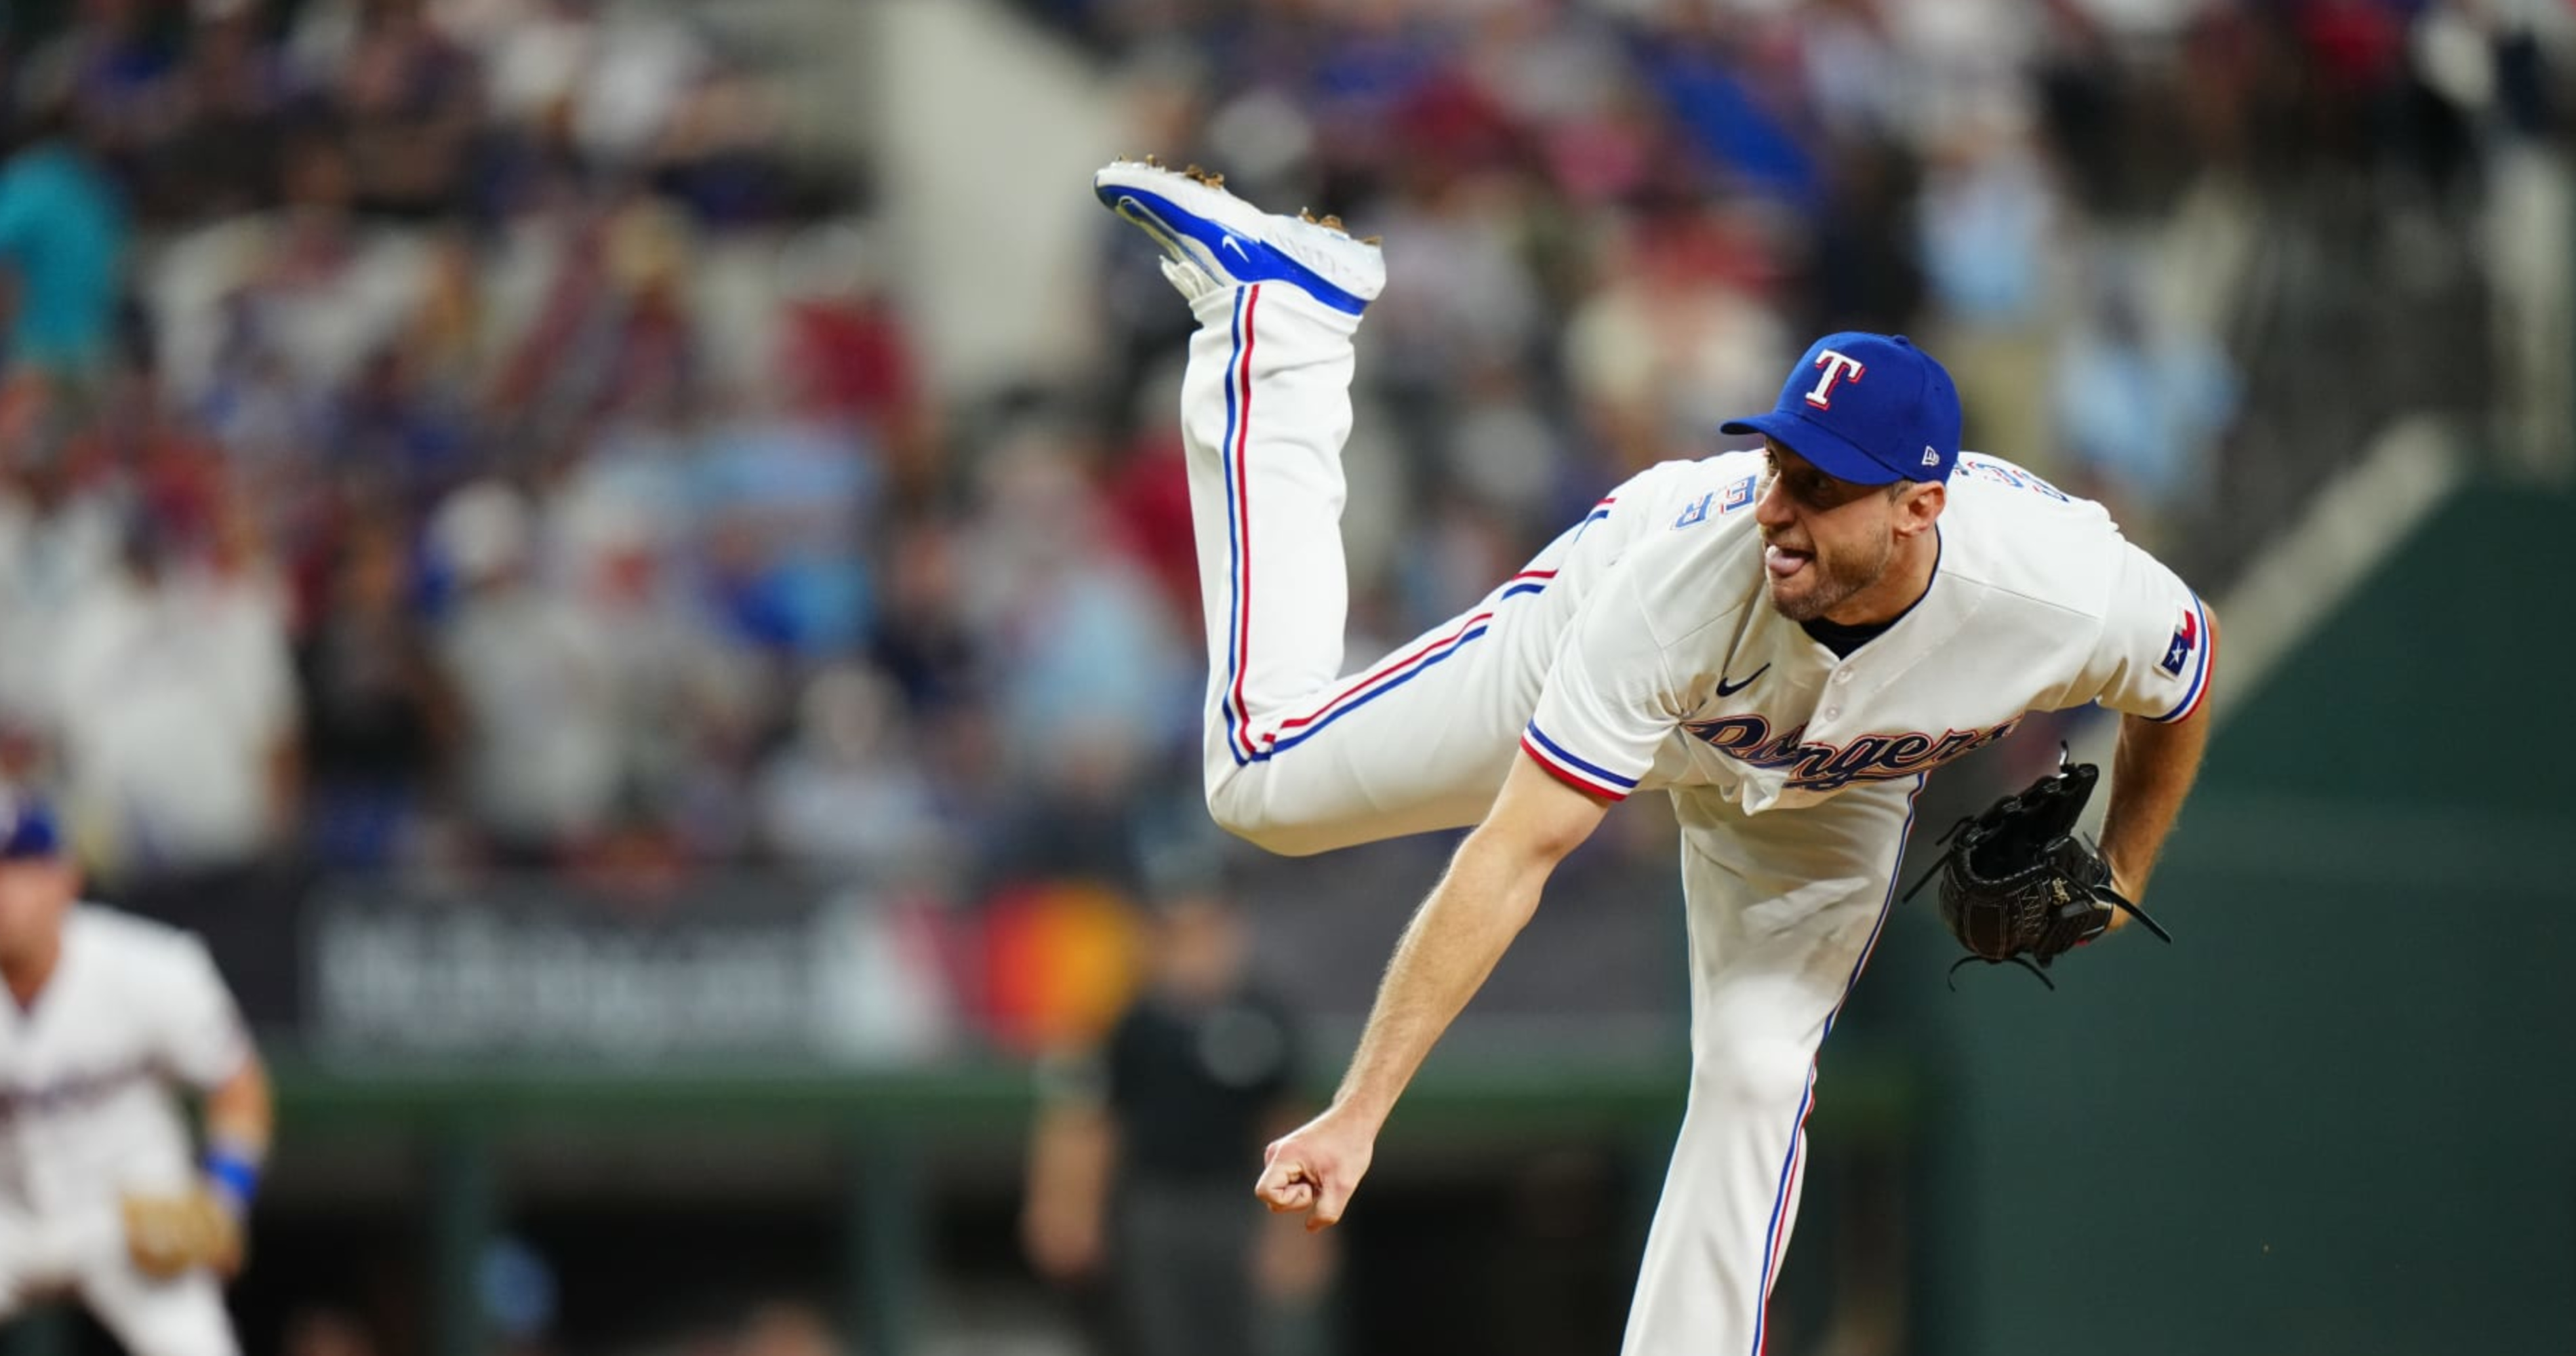 5 things fans may not know about Texas Rangers pitcher Max